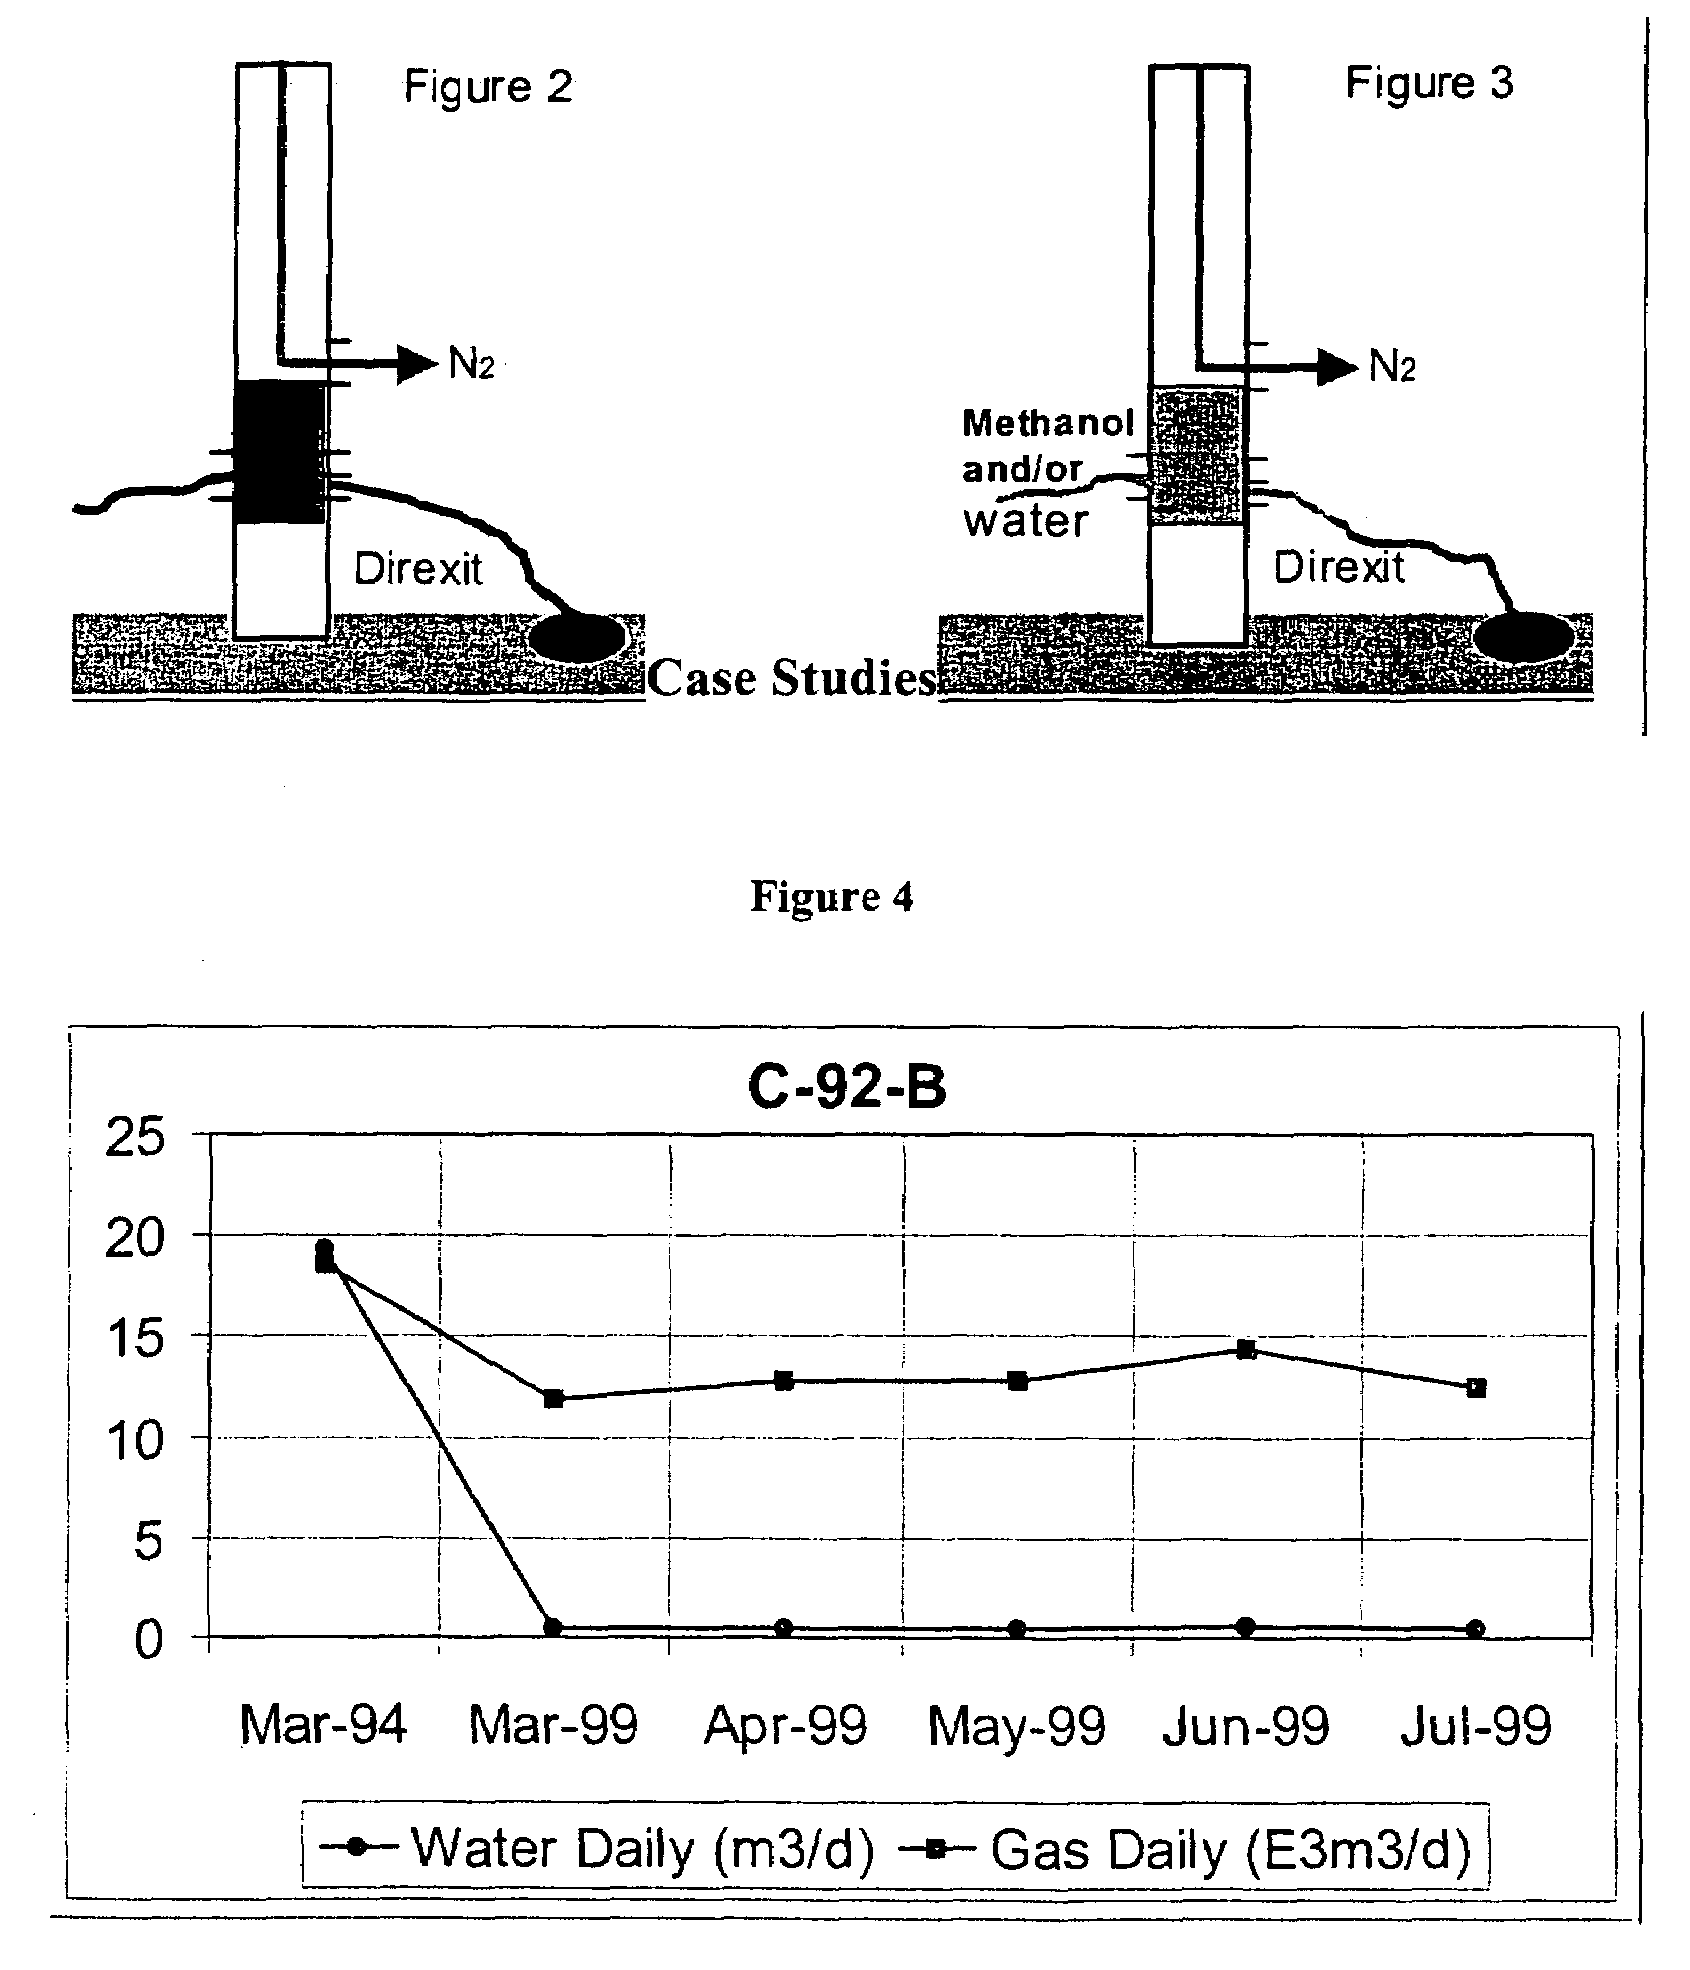 Method for terminating or reducing water flow in a subterranean formation